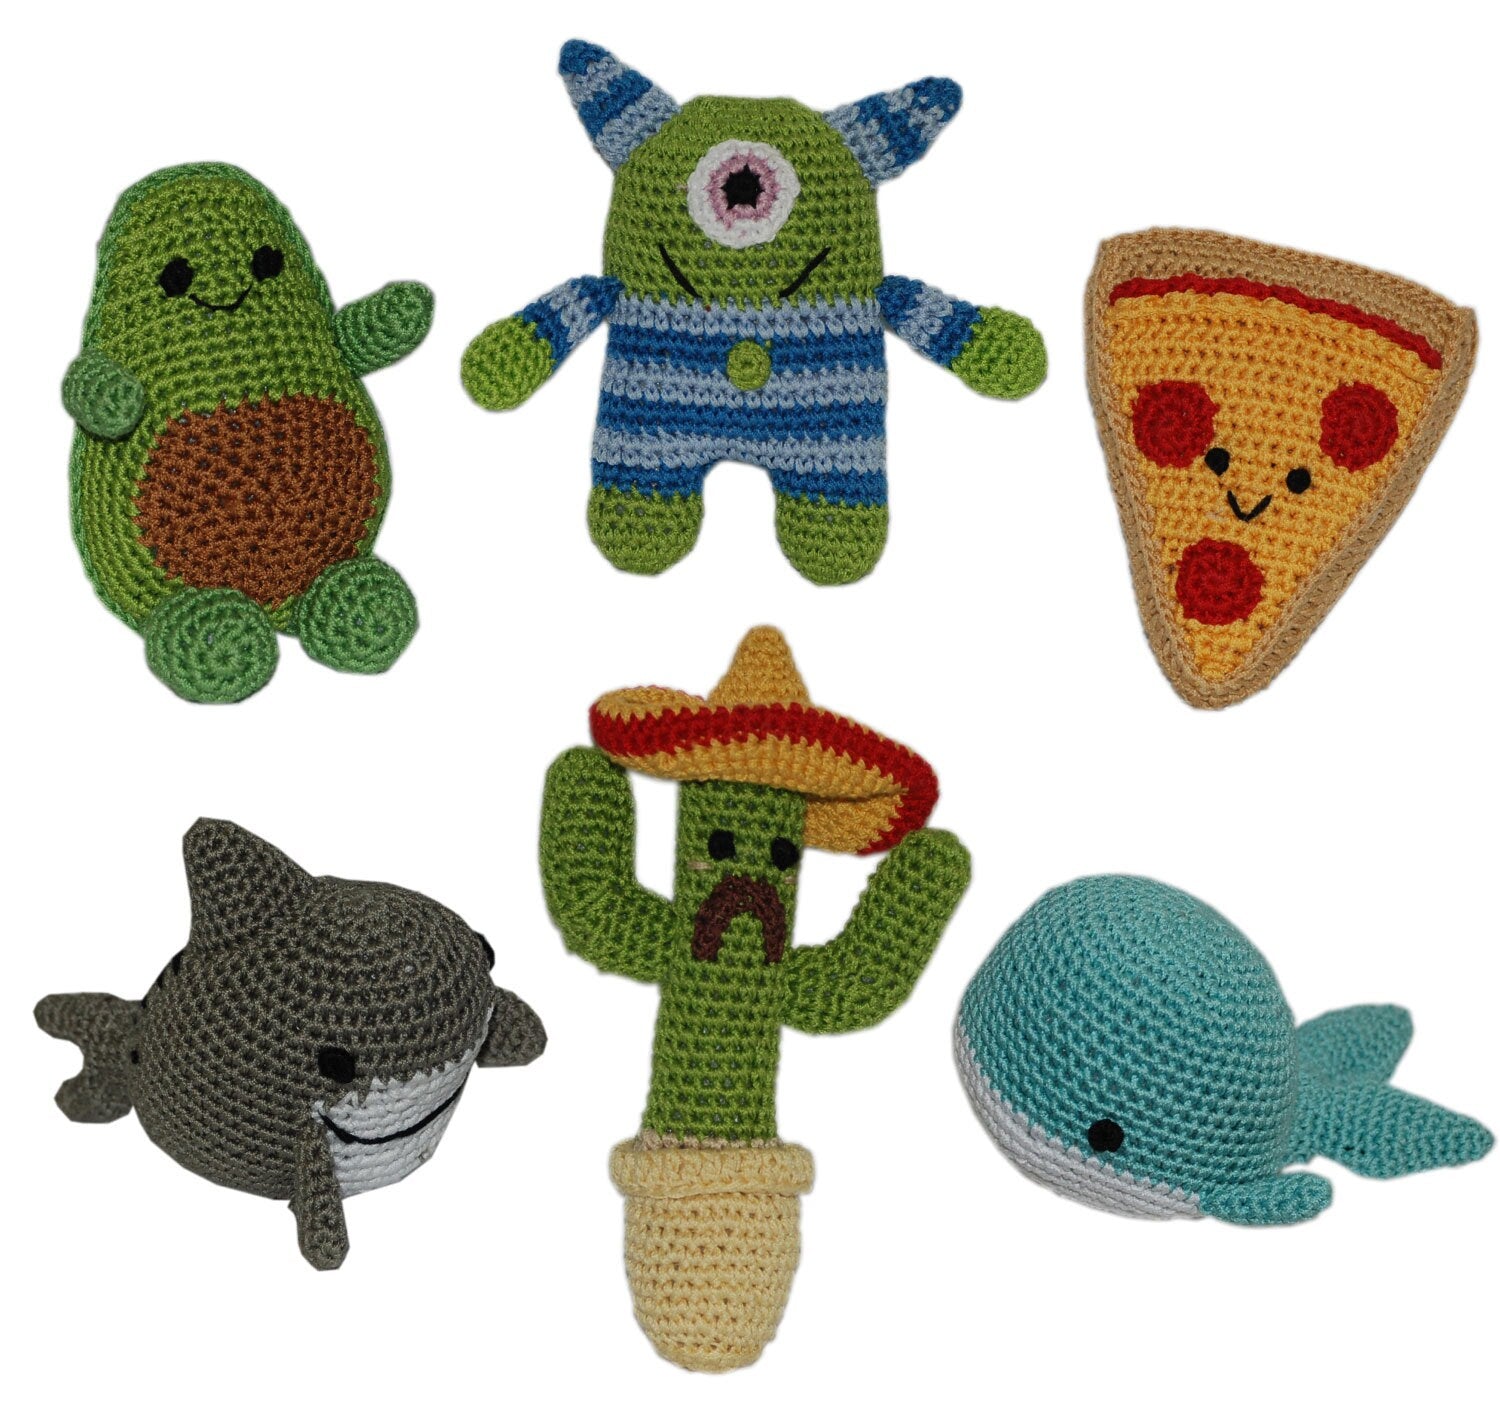 Knit Knacks Organic Cotton Pet & Dog Toys, (Choose from: Pizza, Avocado,  Monster, Shark, Whale or Cactus)